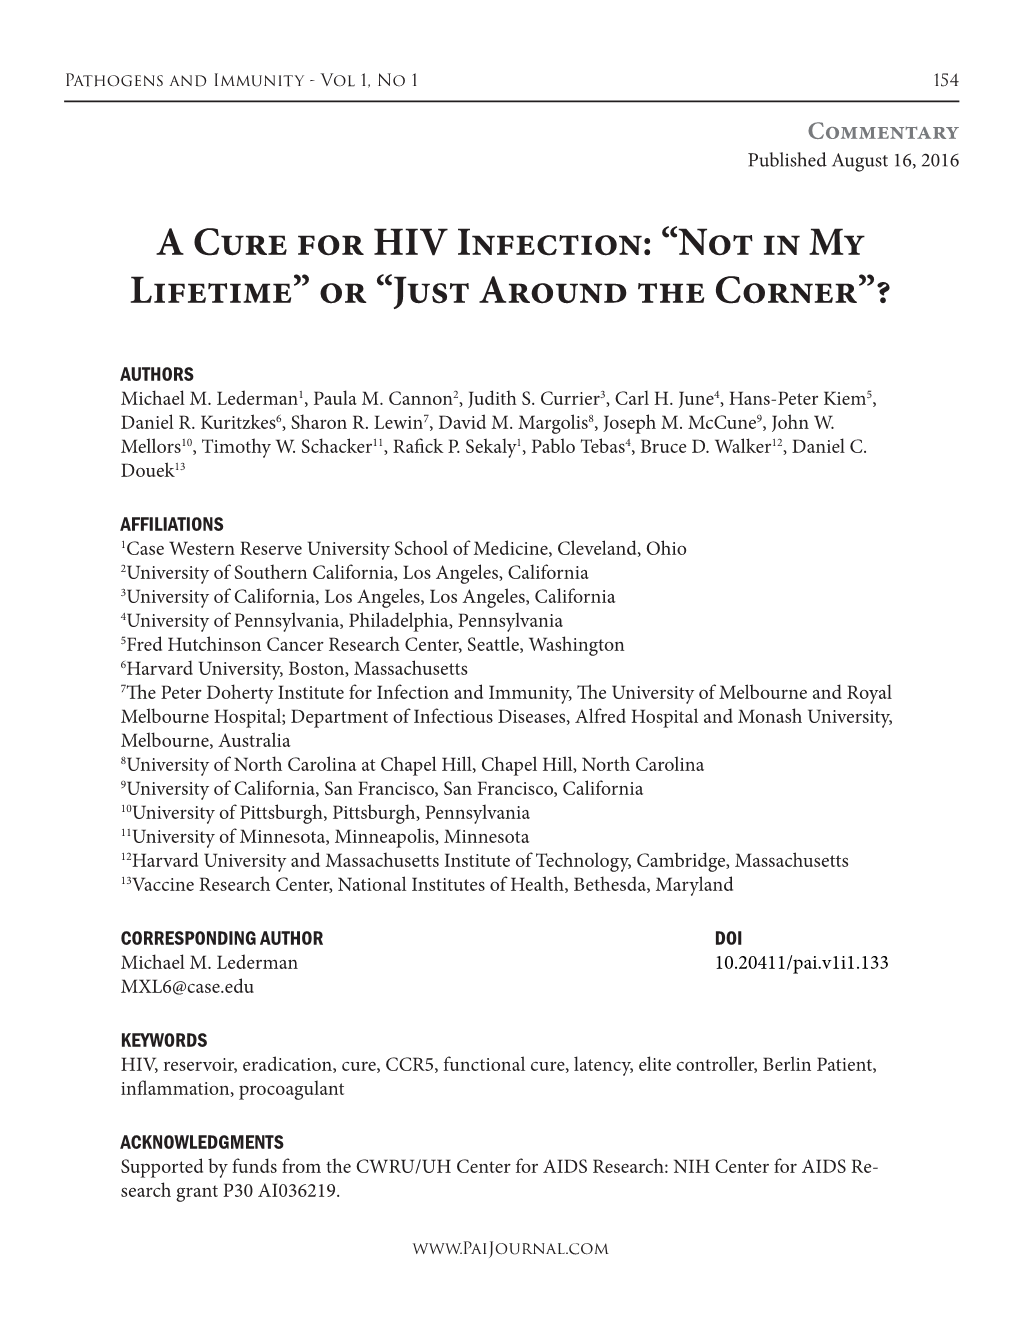 A Cure for HIV Infection? “Not in My Lifetime”